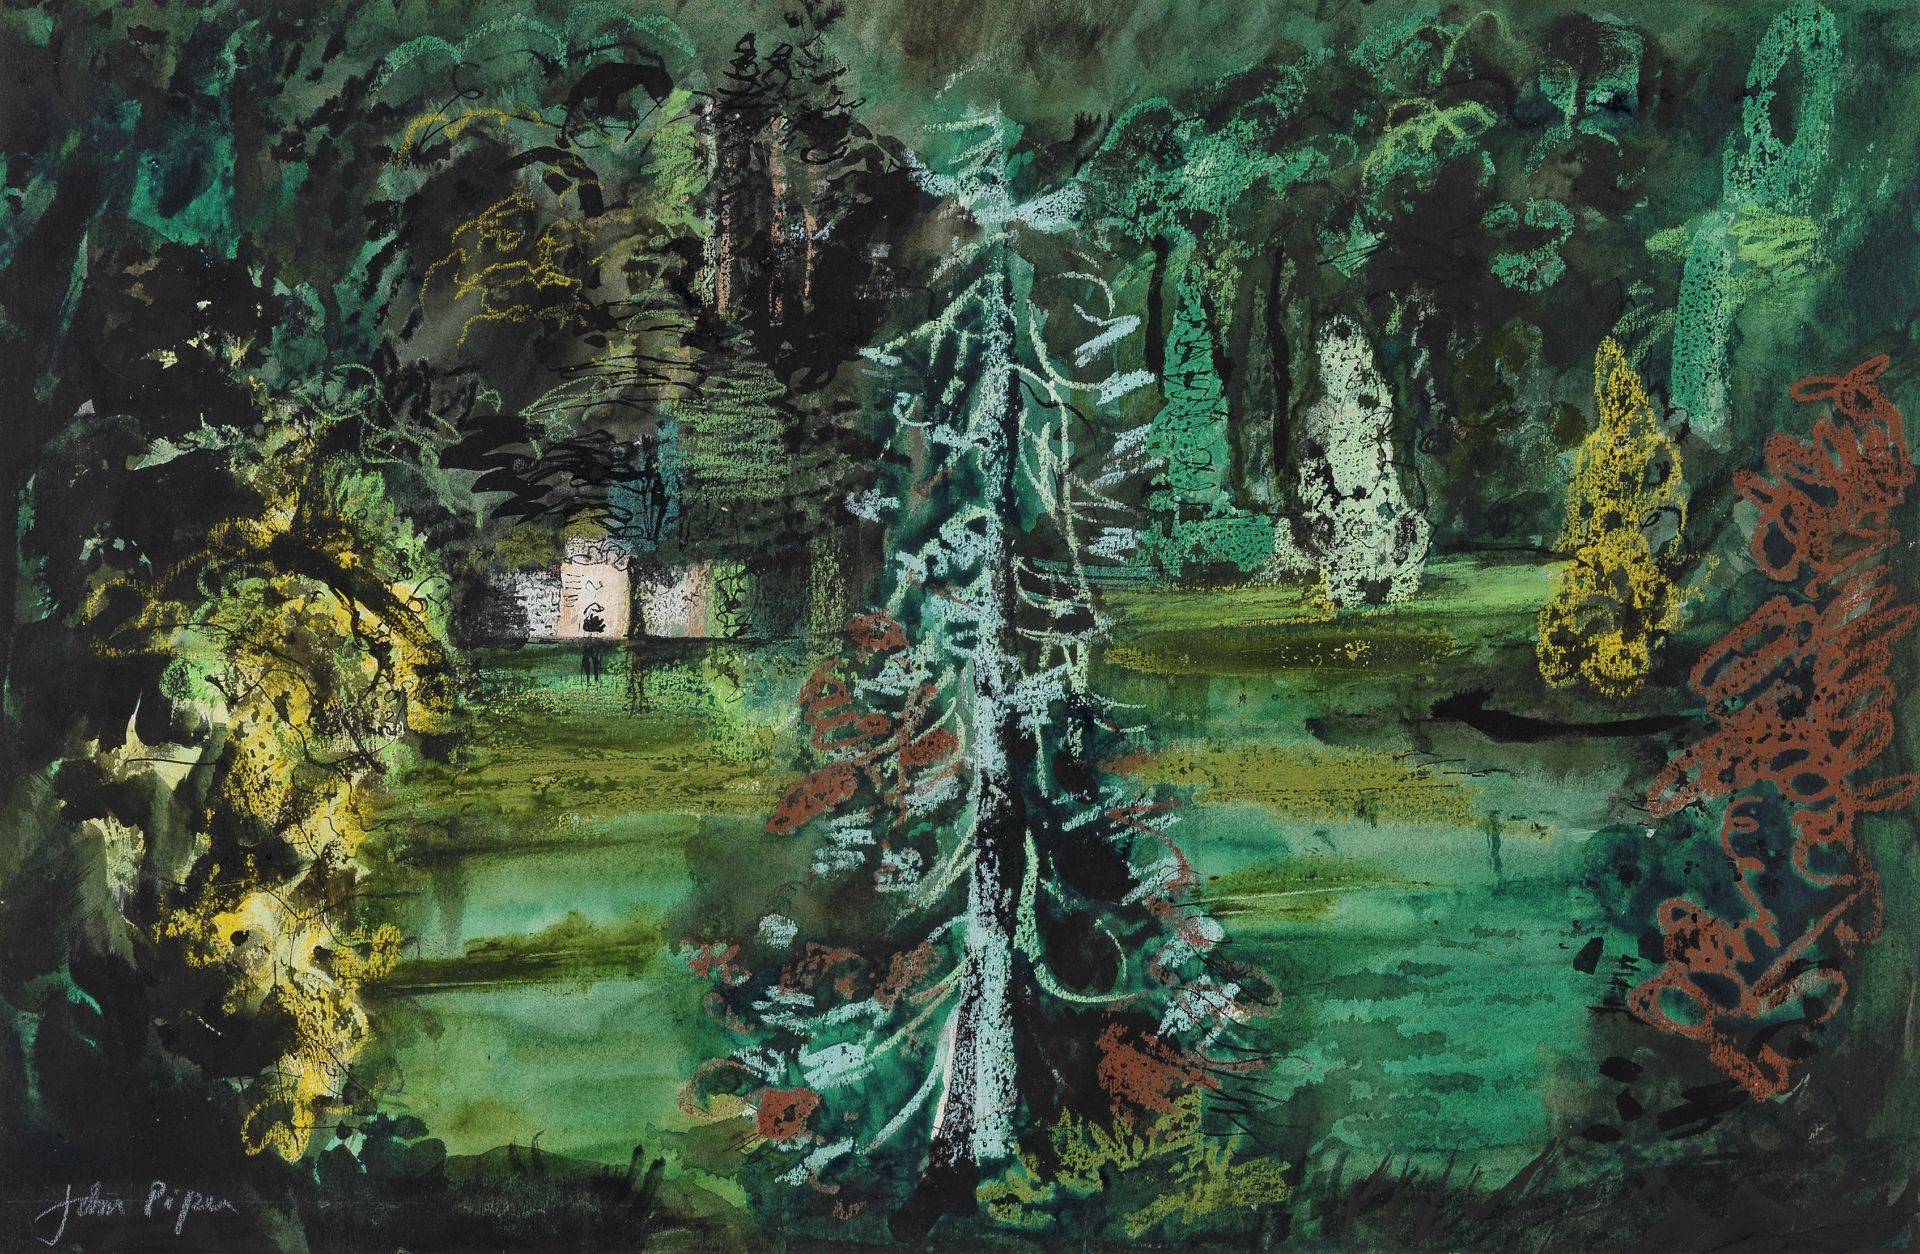 John Piper C.H. (British, 1903-1992) Forest in Wales